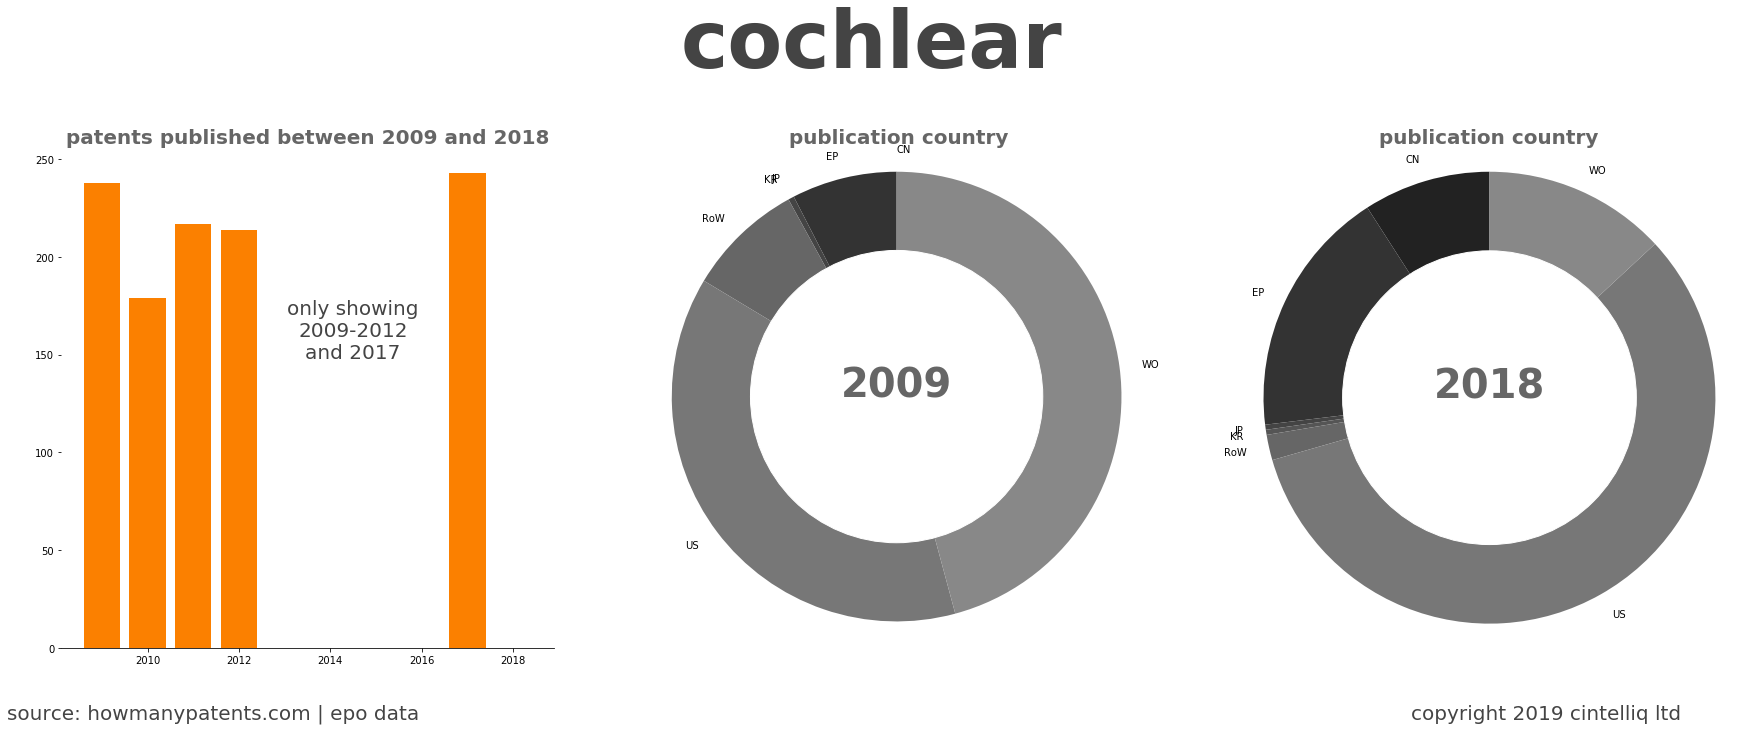 summary of patents for Cochlear